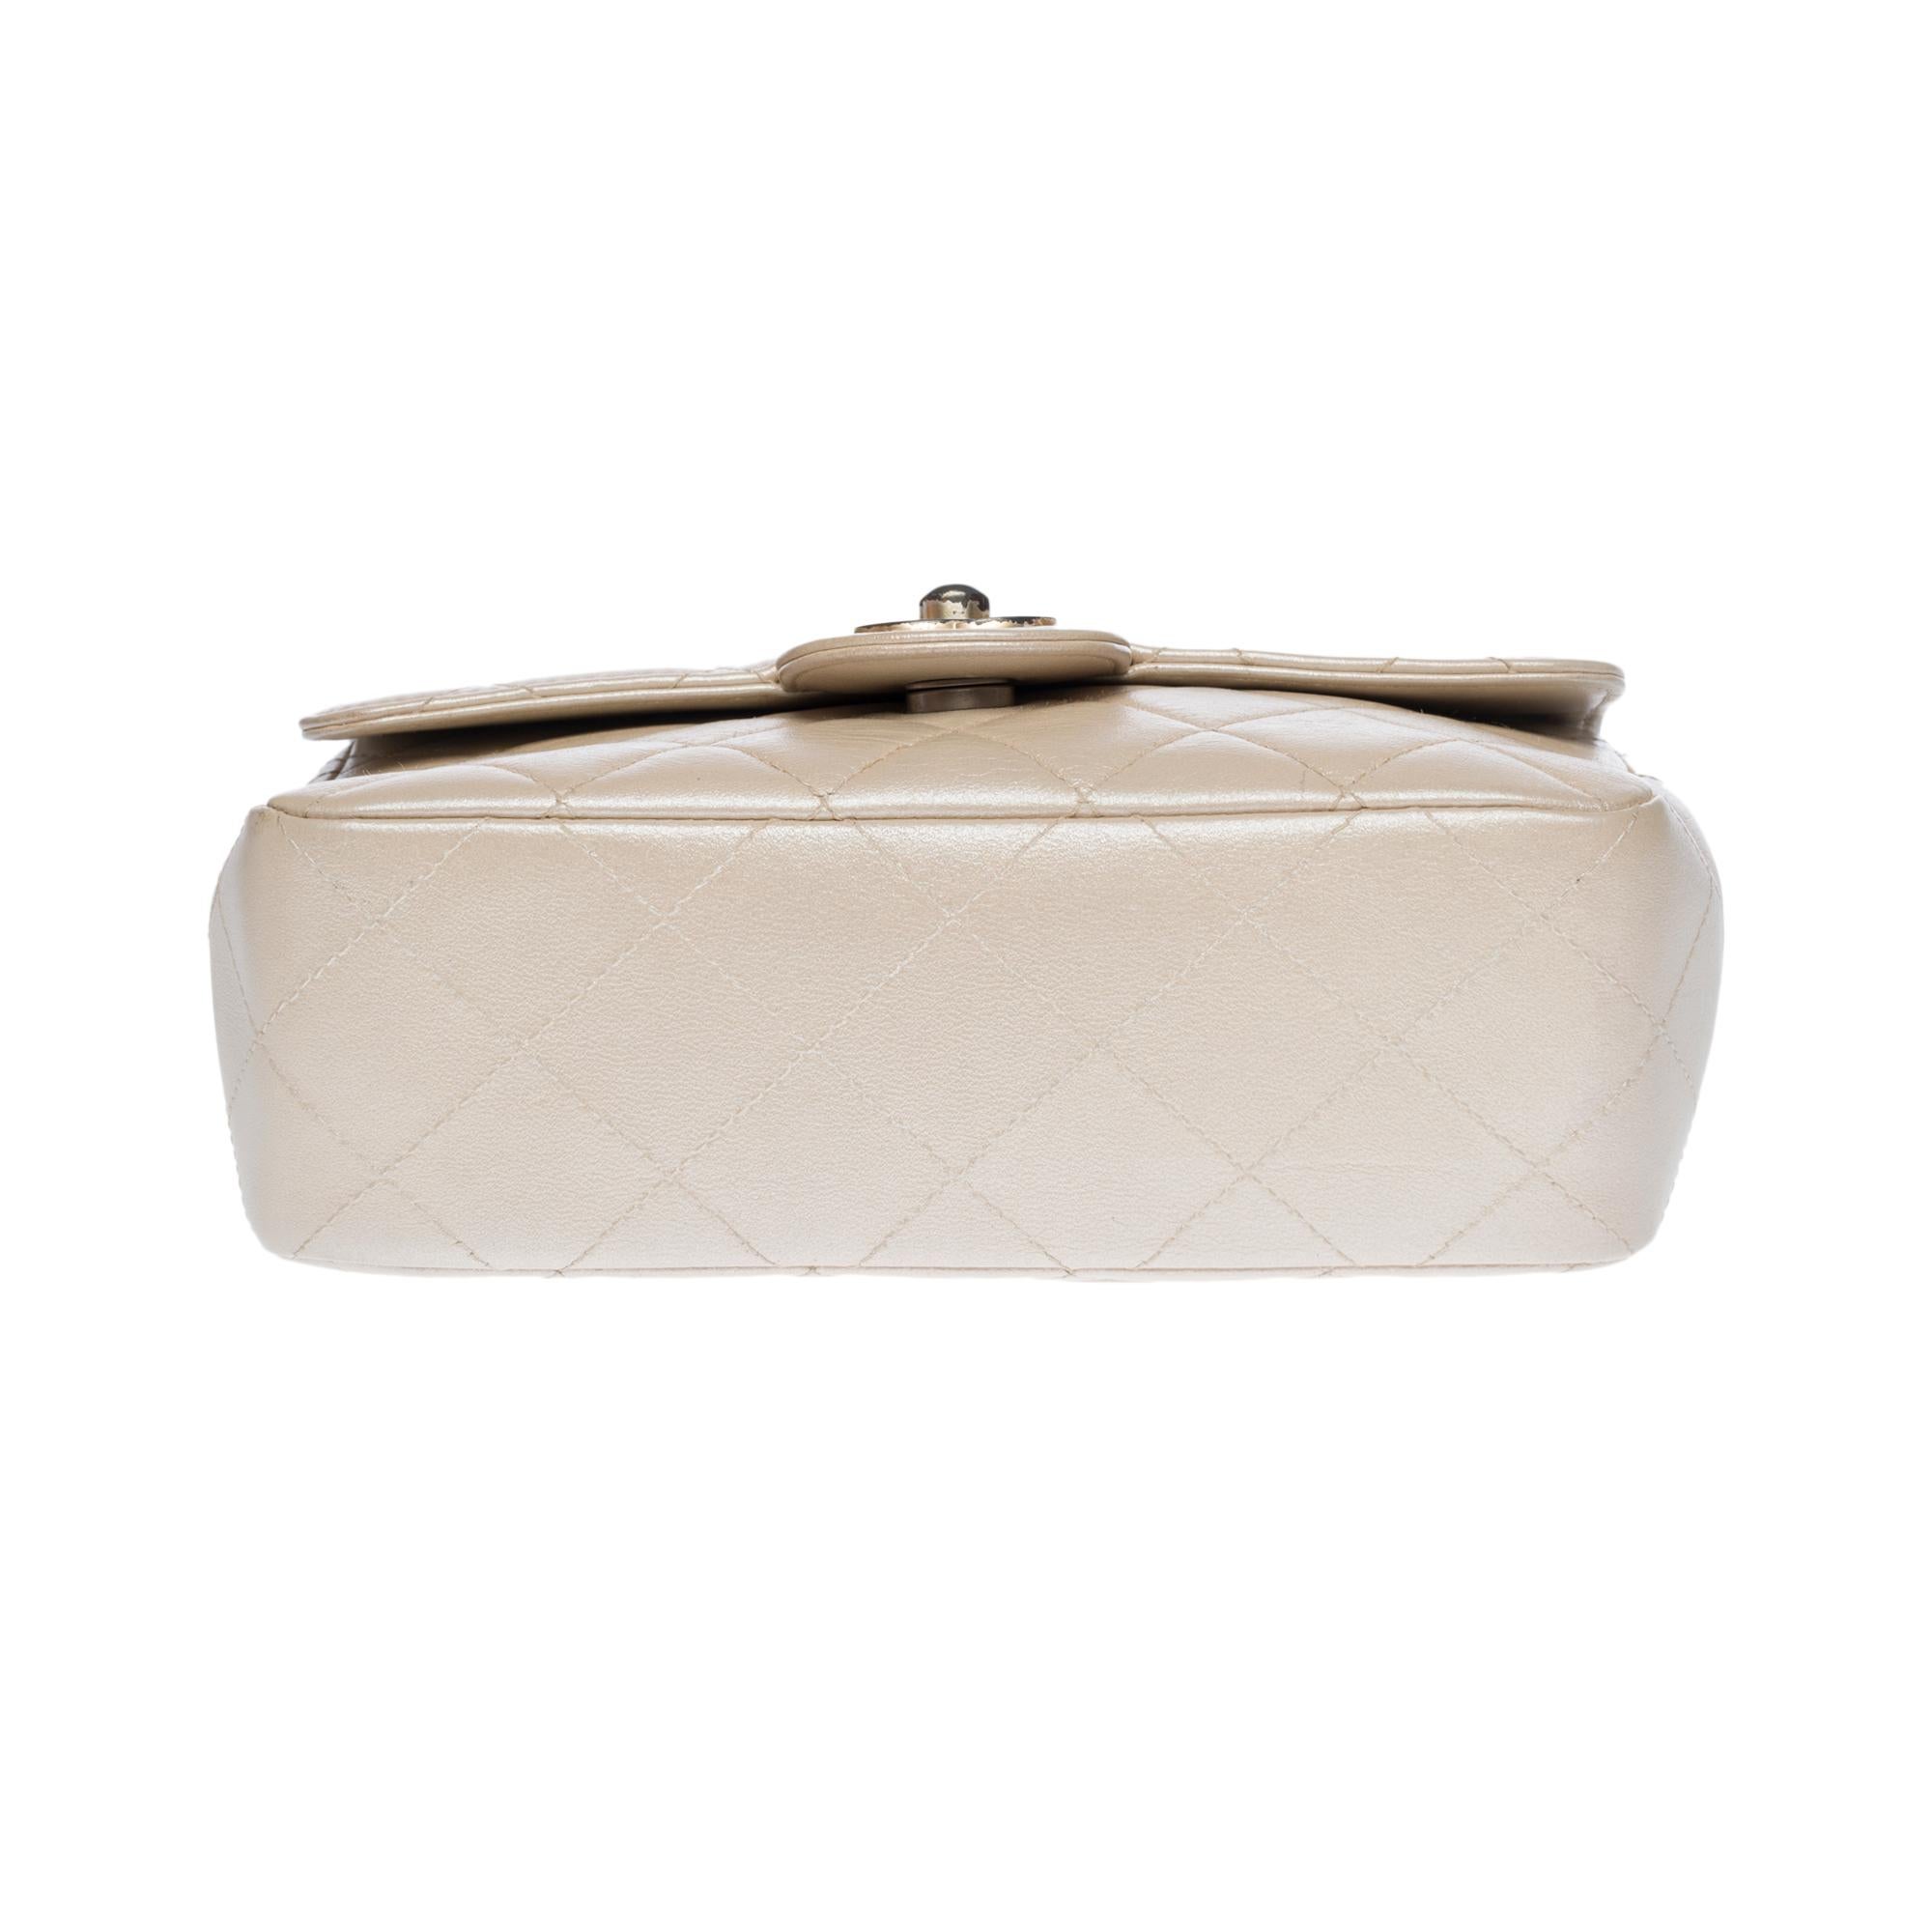 Chanel Mini Timeless flap shoulder bag in metallic mother-of-pearl leather, GHW 4